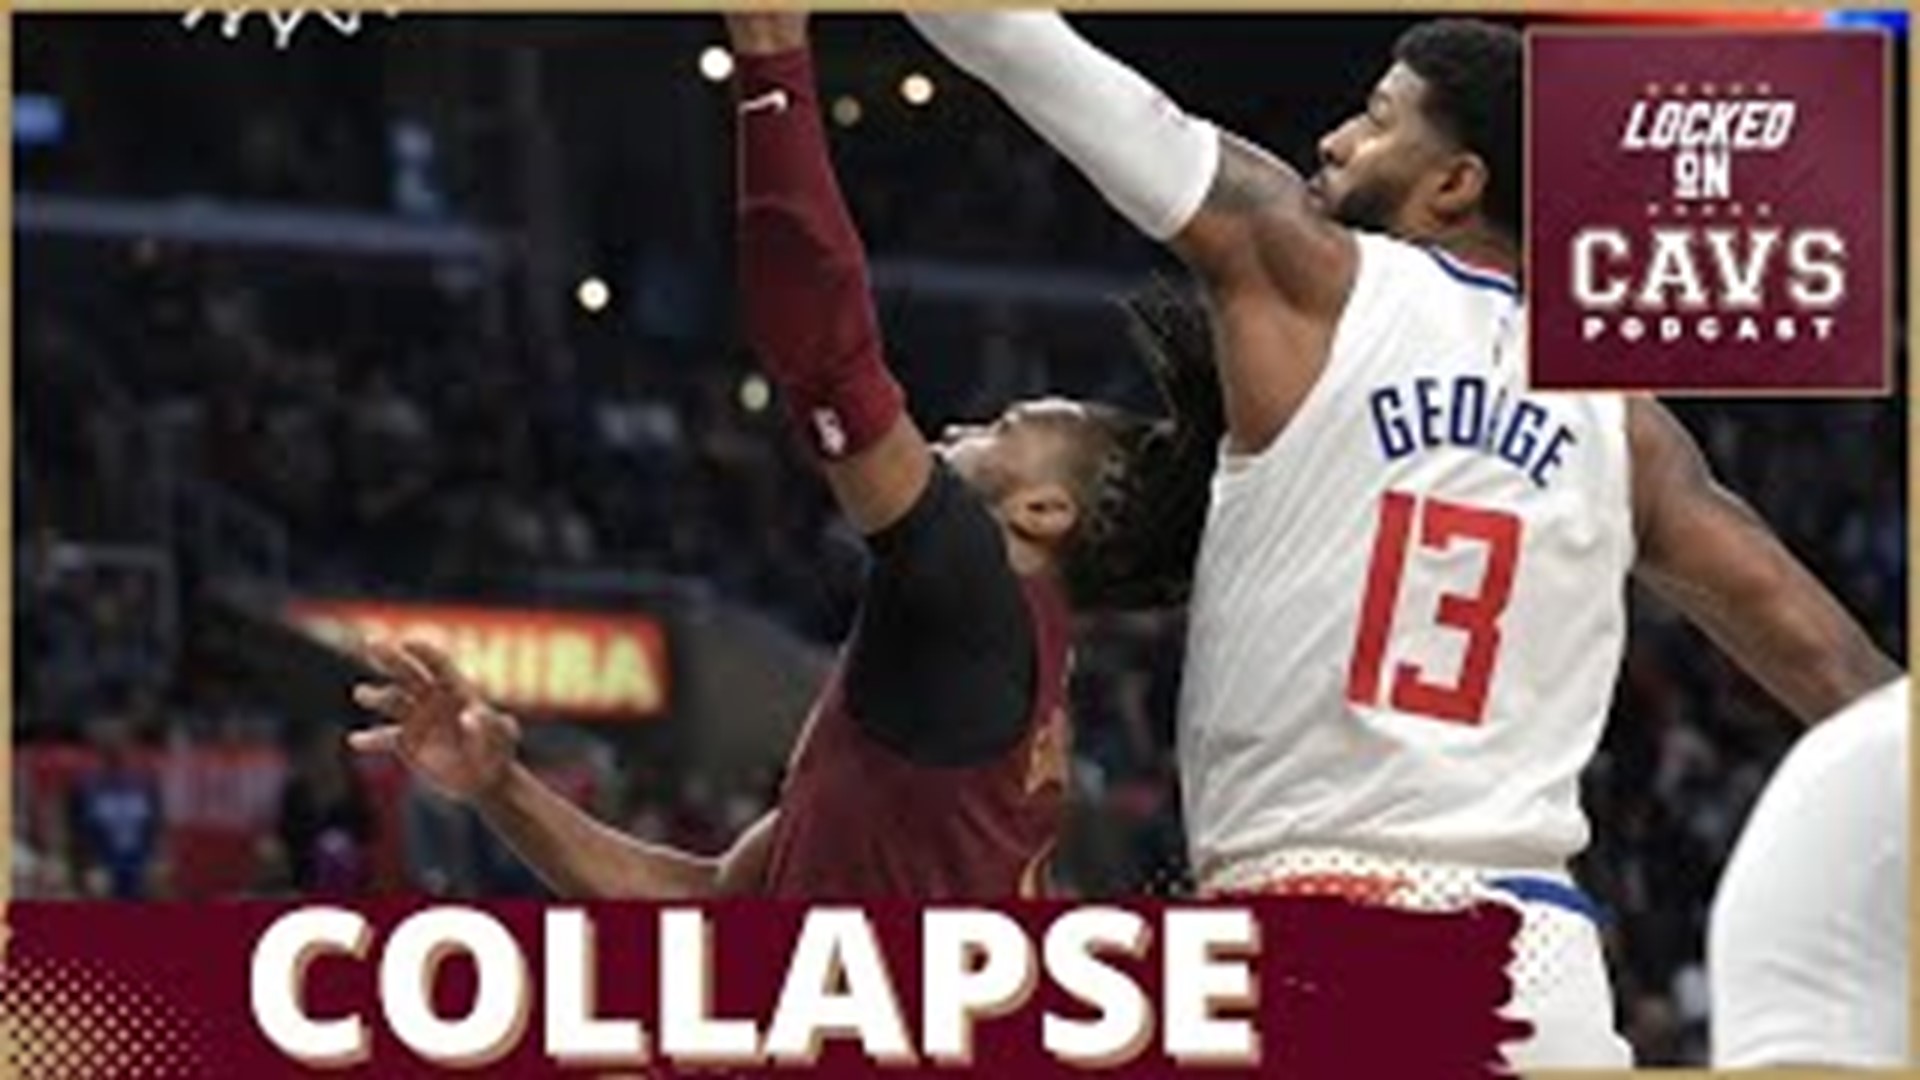 On a new episode of Locked on Cavs host Chris Manning goes solo to talk about the Cavs' bad loss to the Clippers and what the loss says about the Cavs.